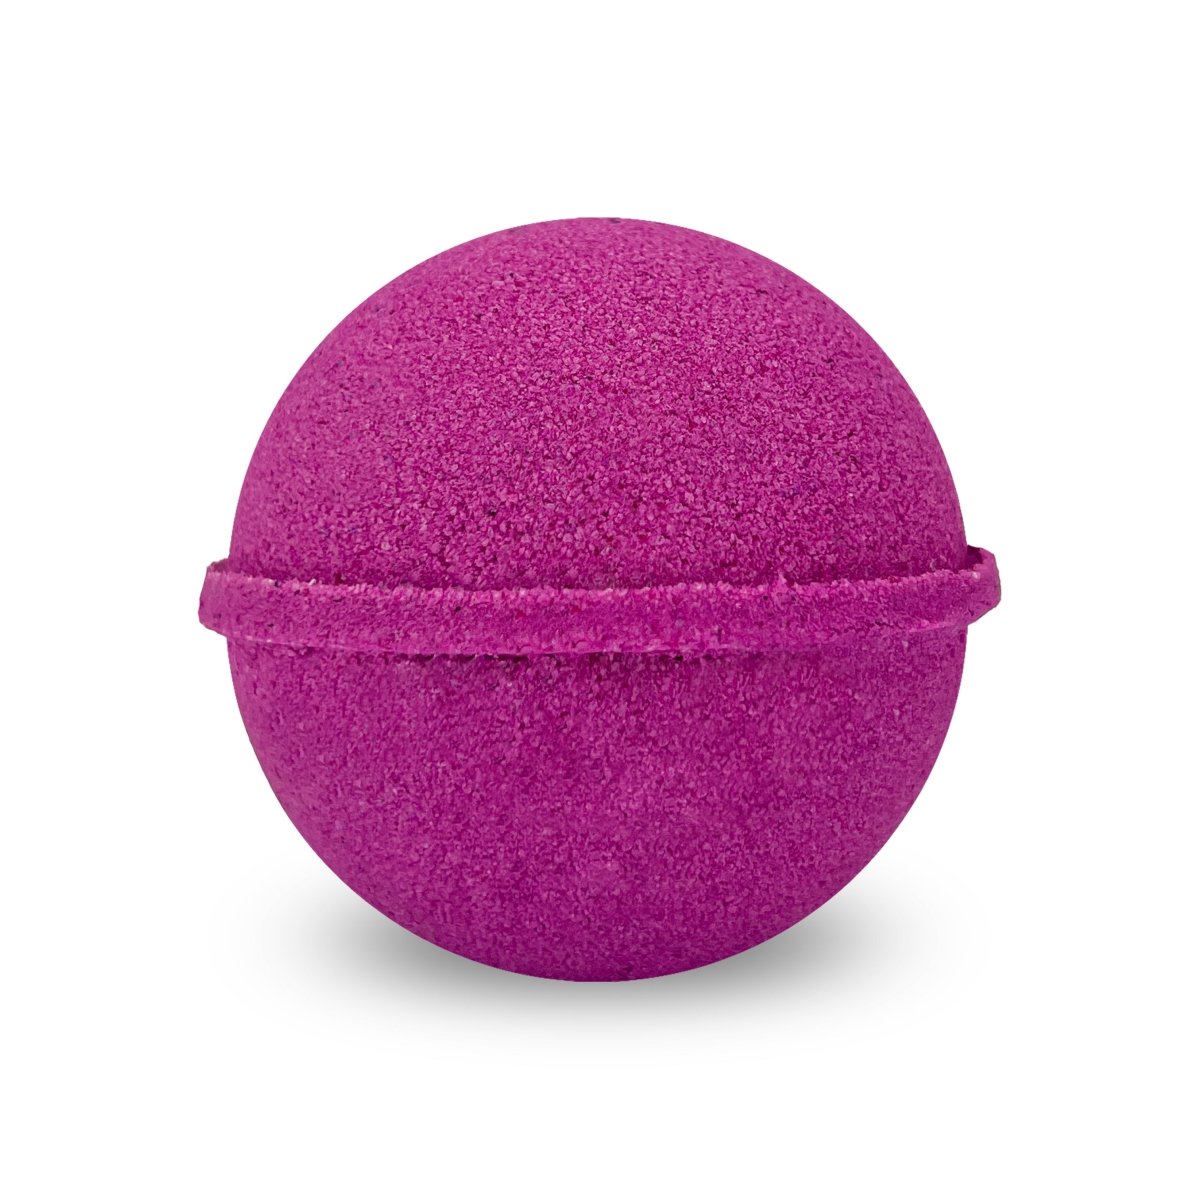 Restore Bath Bomb for Kids & Adults - Aromatherapy Benefits & Epsom Salts to Soothe Muscles - Made in Australia by Bath Box